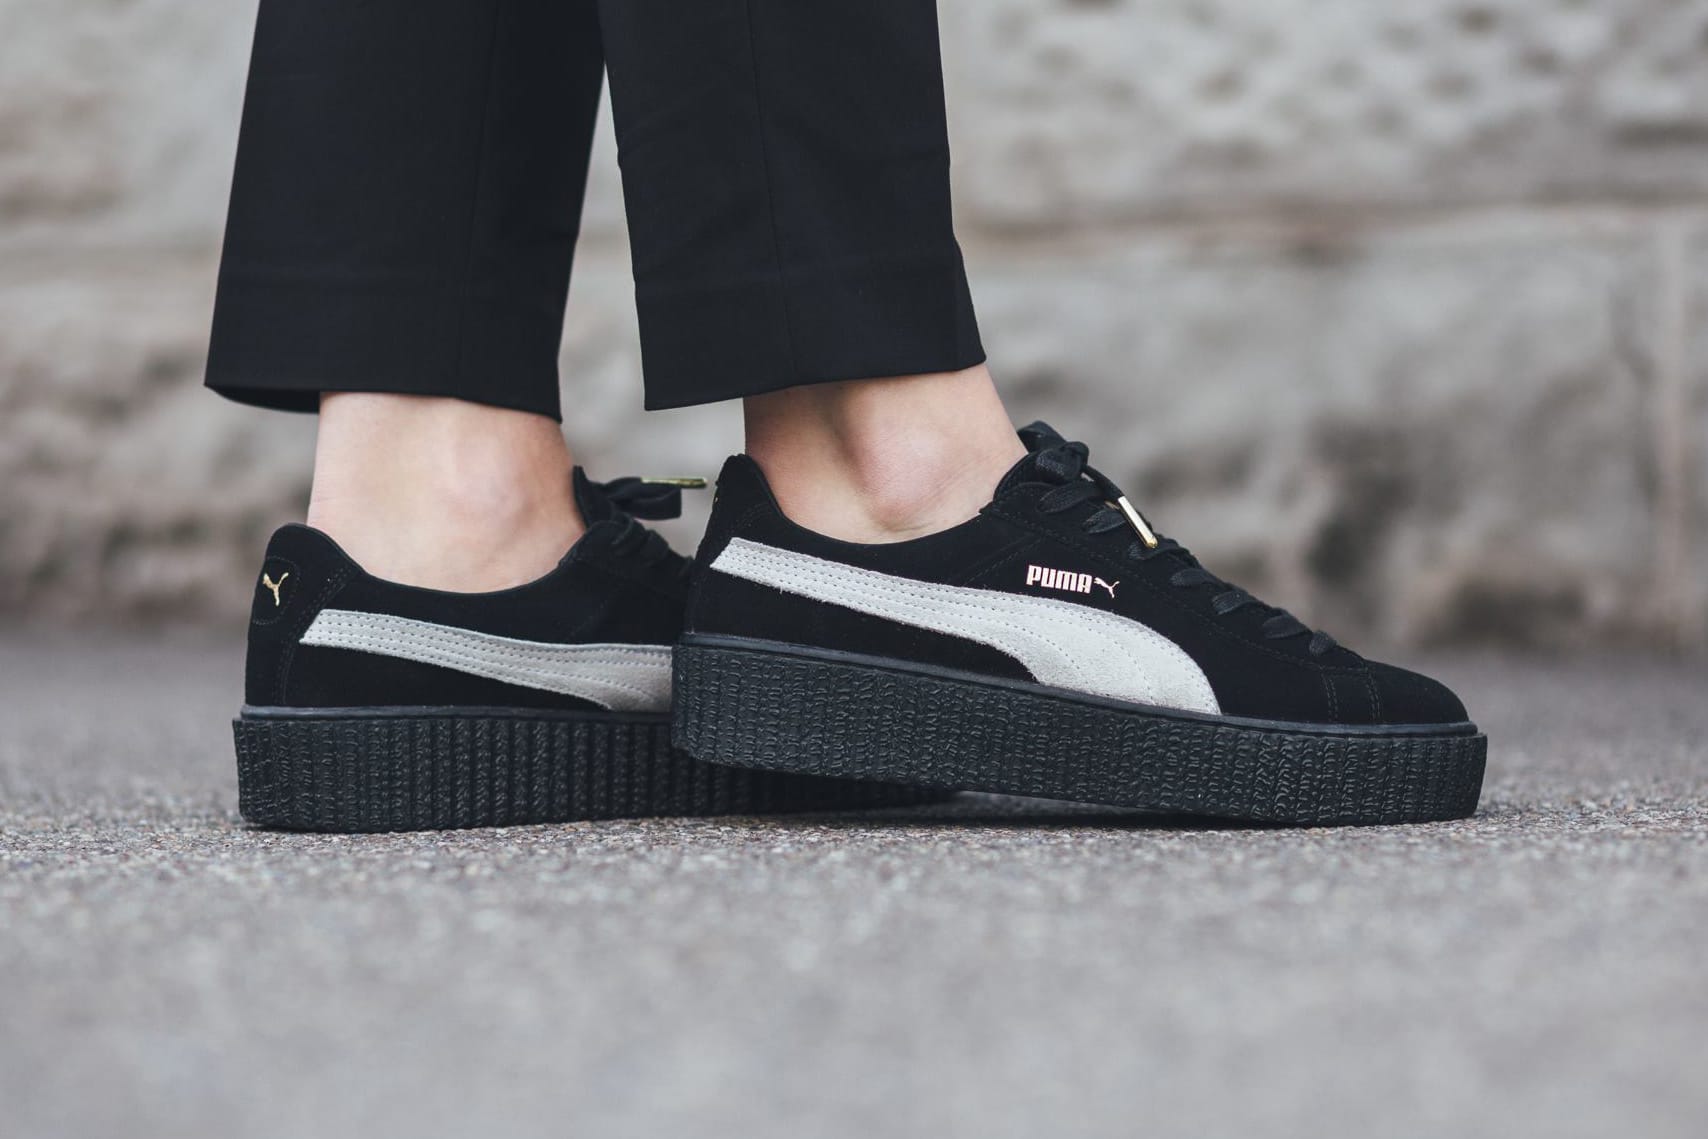 Rihanna re-releases her PUMA creepers 